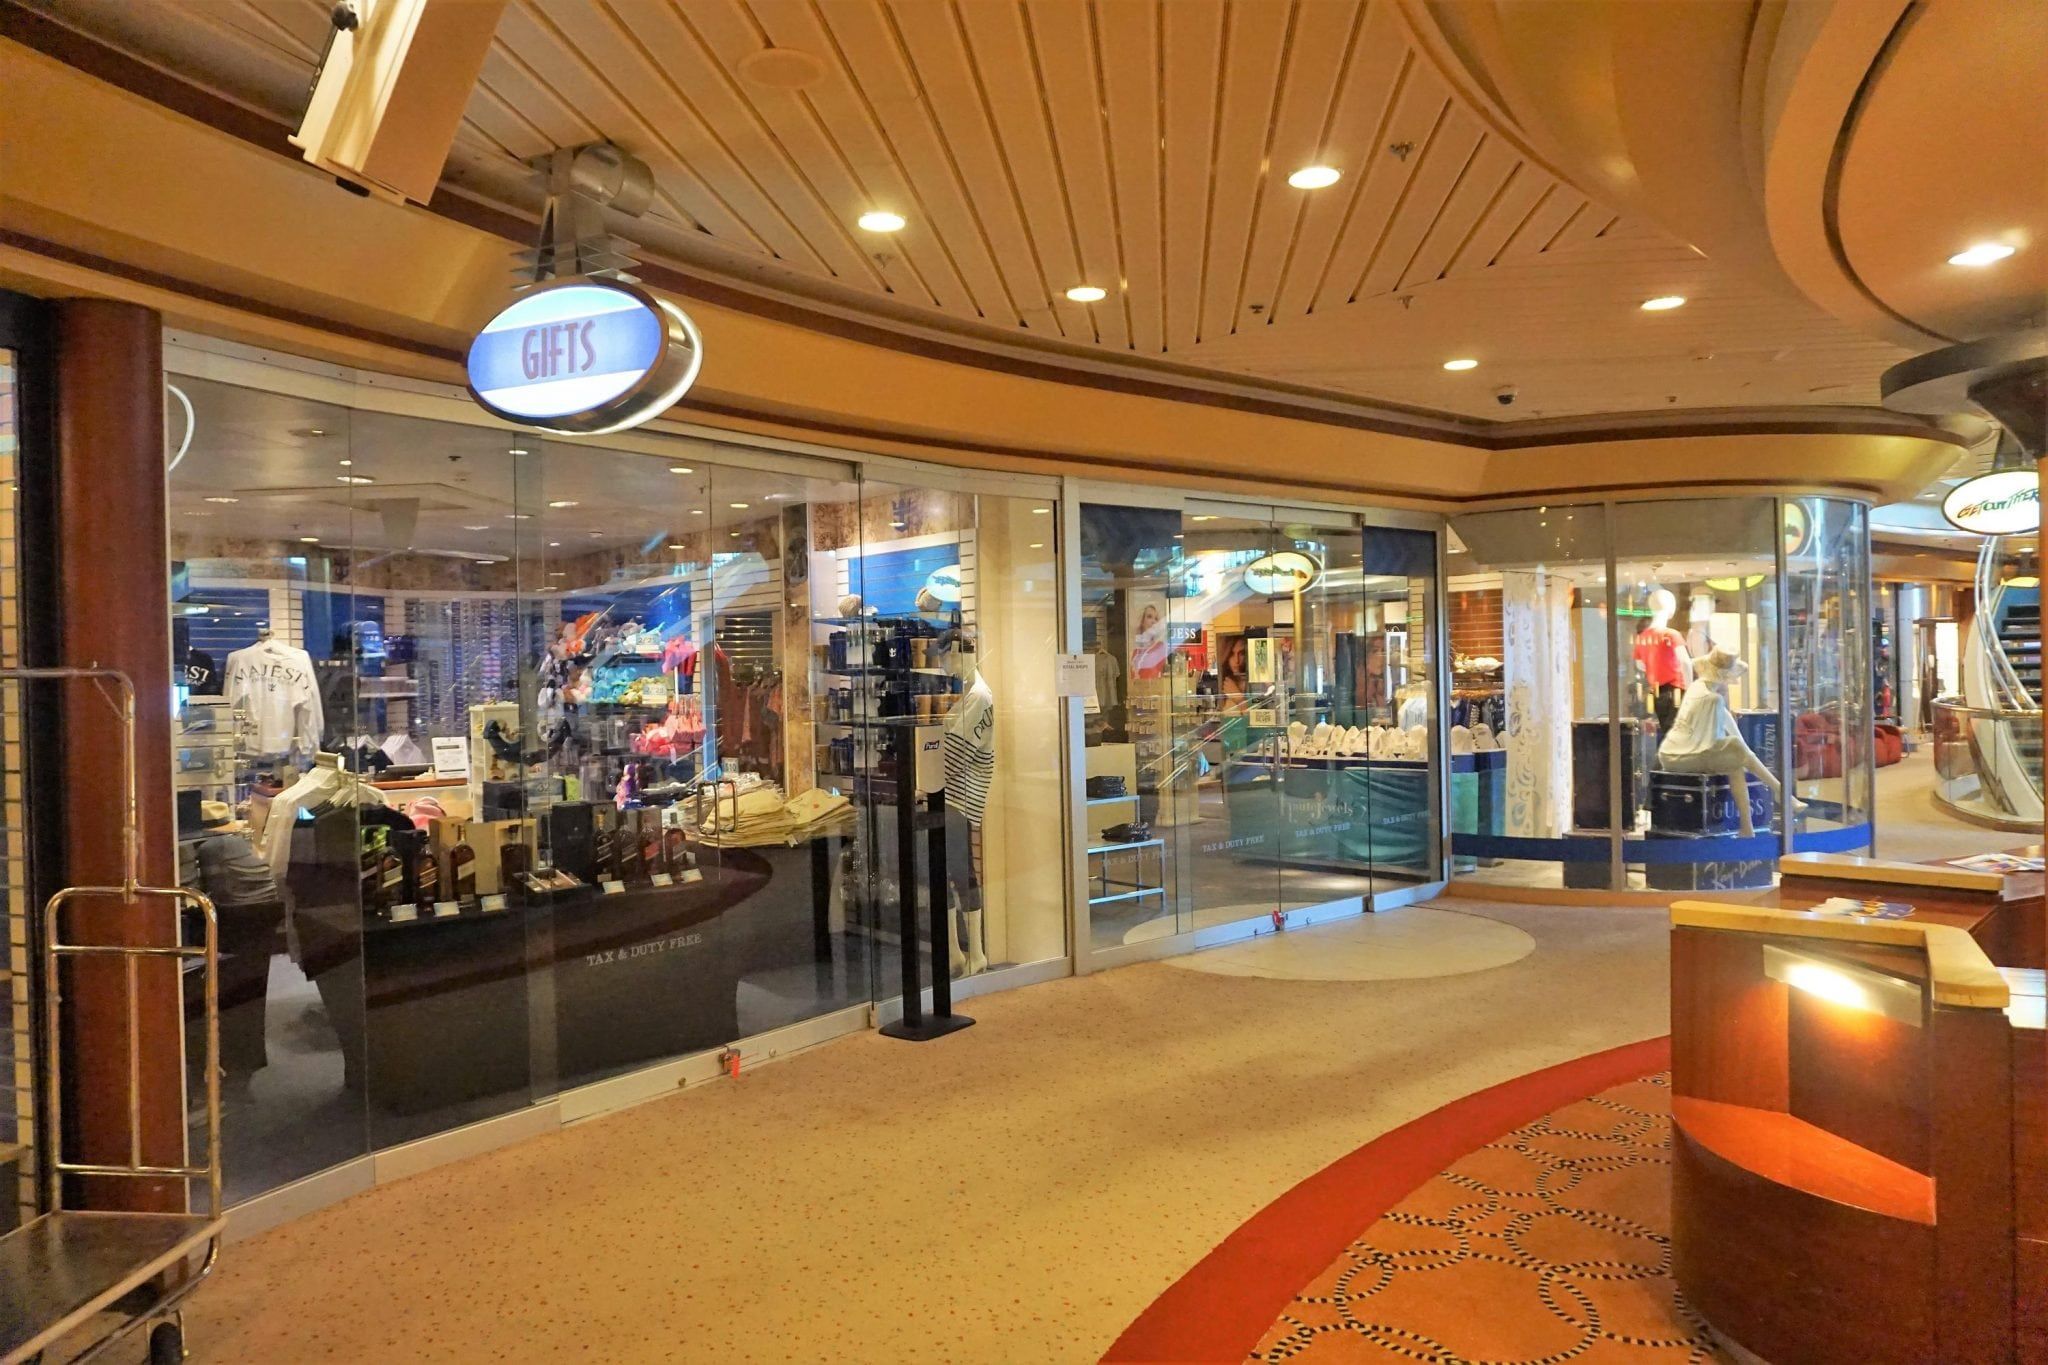 Shops on Majesty of the Seas